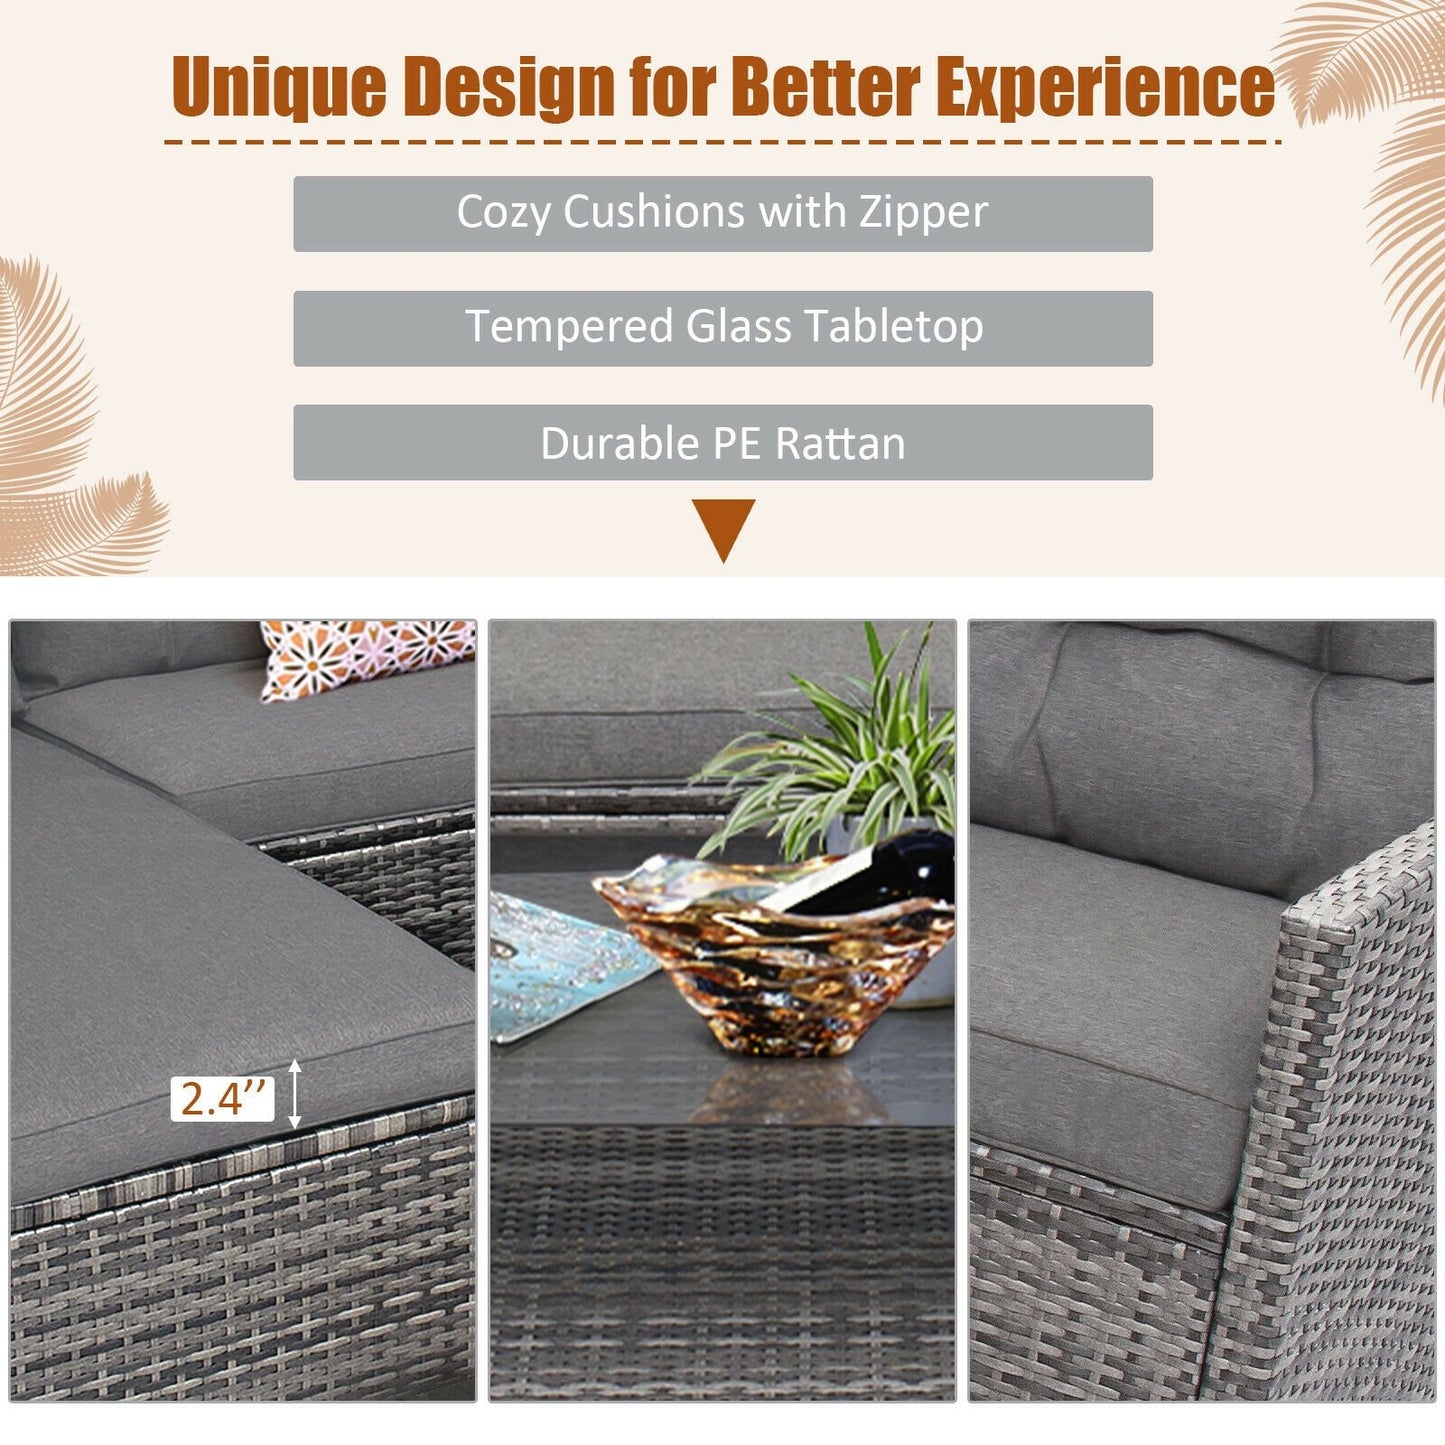 4 Pieces Patio Rattan Furniture Set with Cushion and Table Shelf, Gray - Gallery Canada